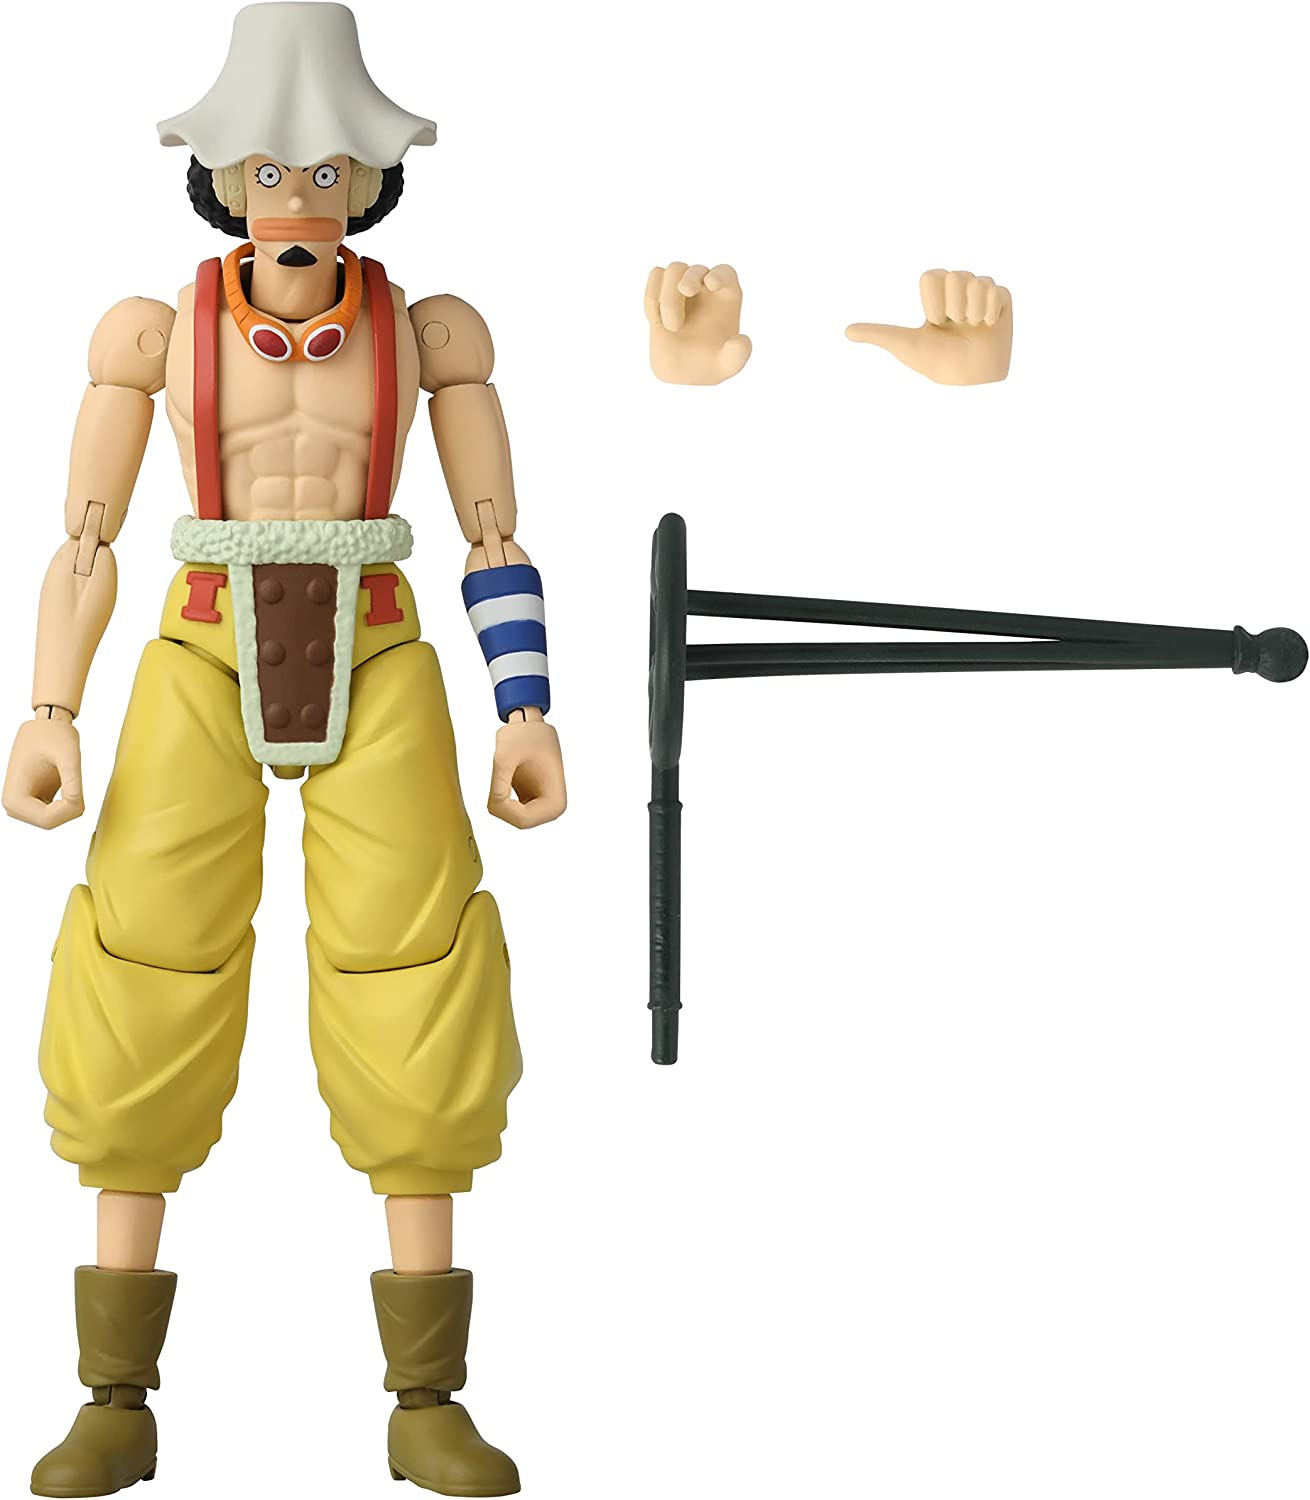 One Piece Anime Heroes Monkey D. Luffy Version 2 Action Figure